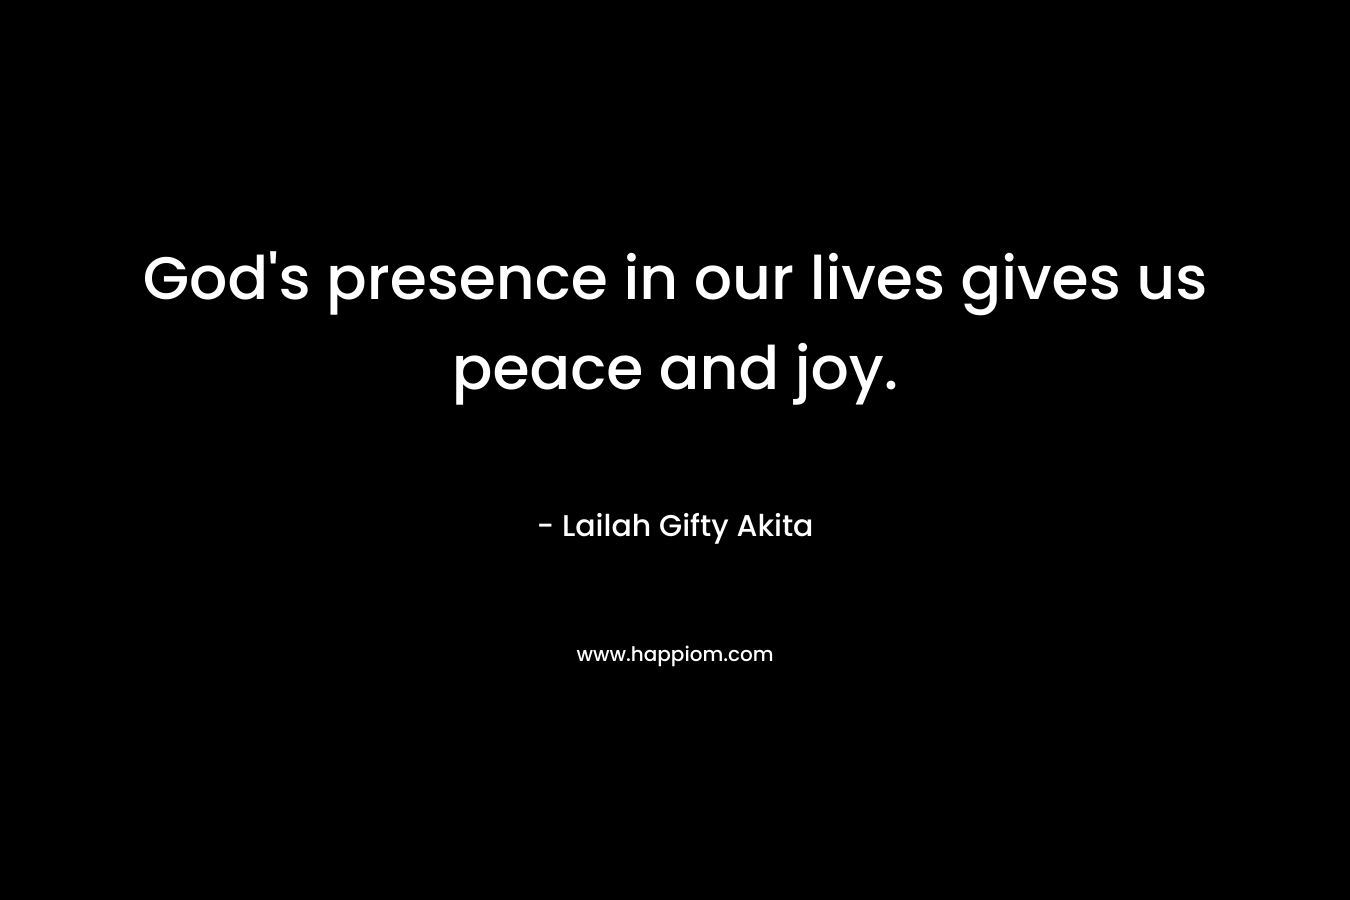 God's presence in our lives gives us peace and joy.